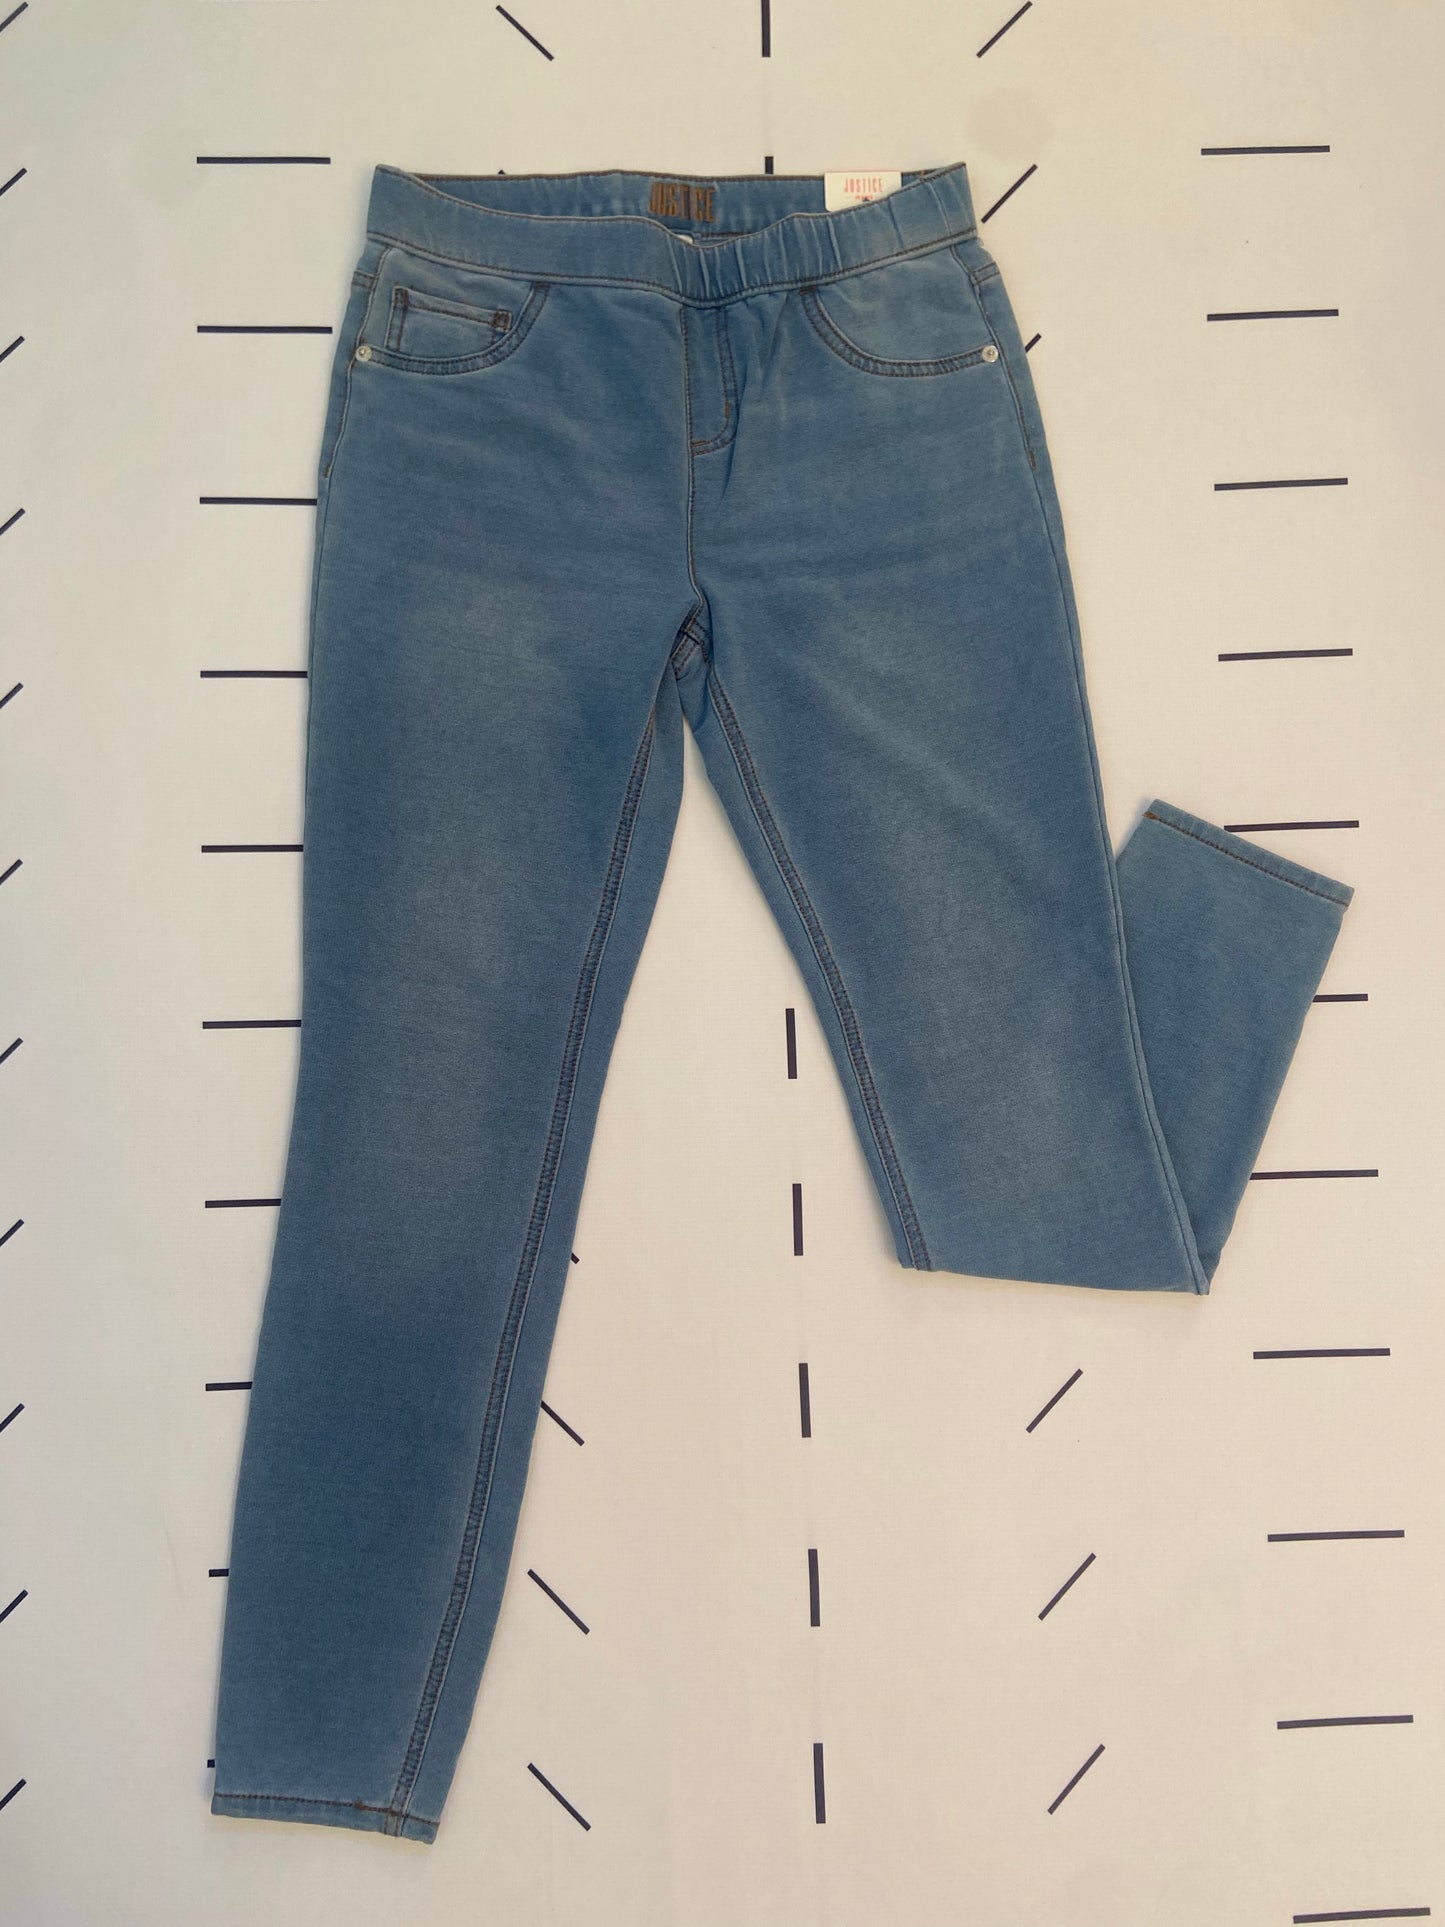 Justice Jeggings - NWT - Youth XL (18)